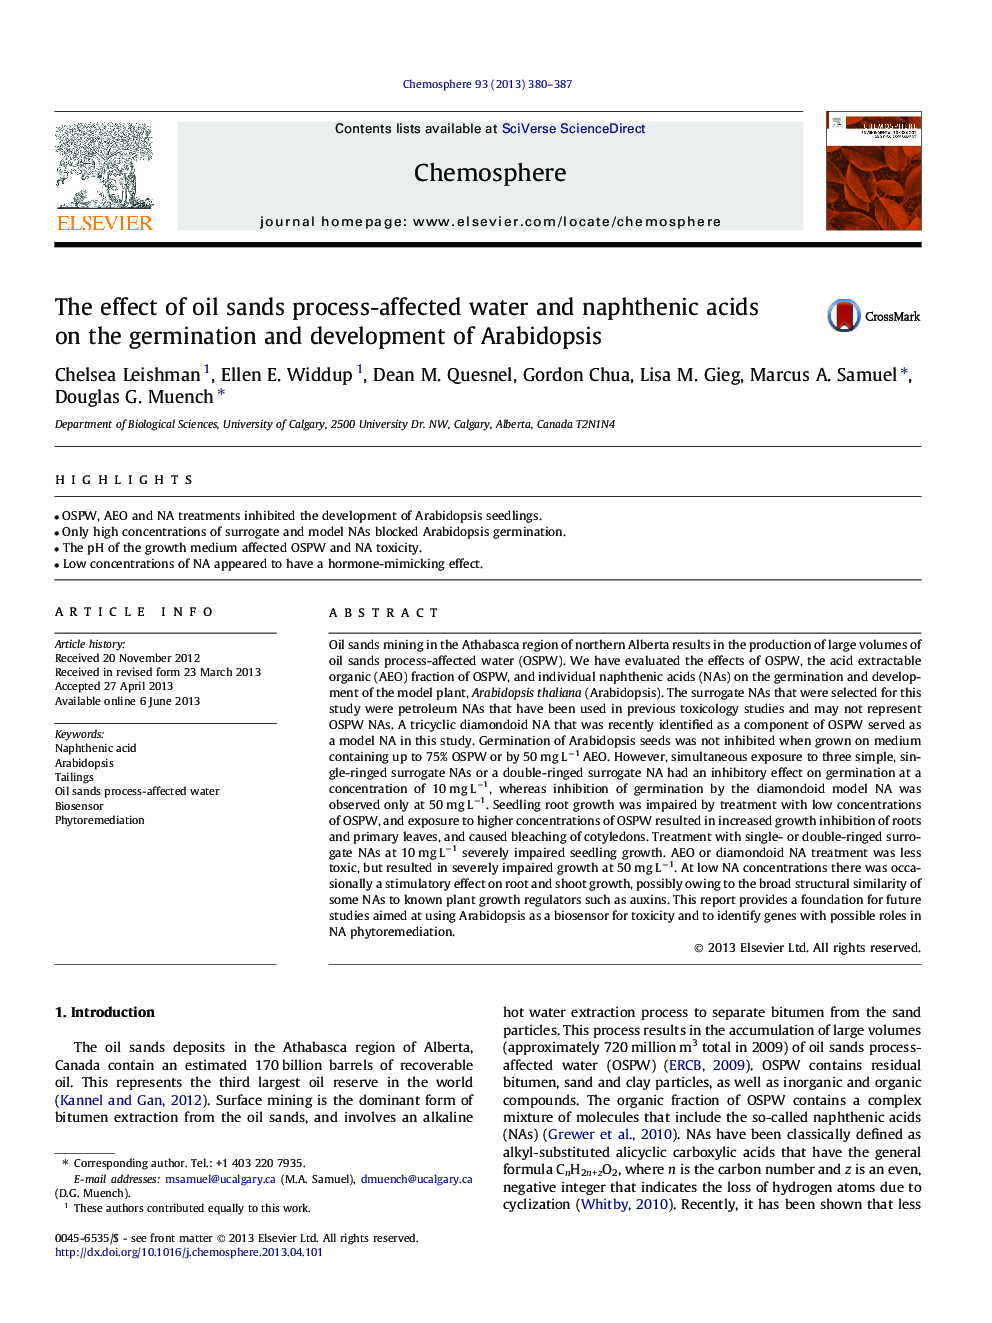 The effect of oil sands process-affected water and naphthenic acids on the germination and development of Arabidopsis